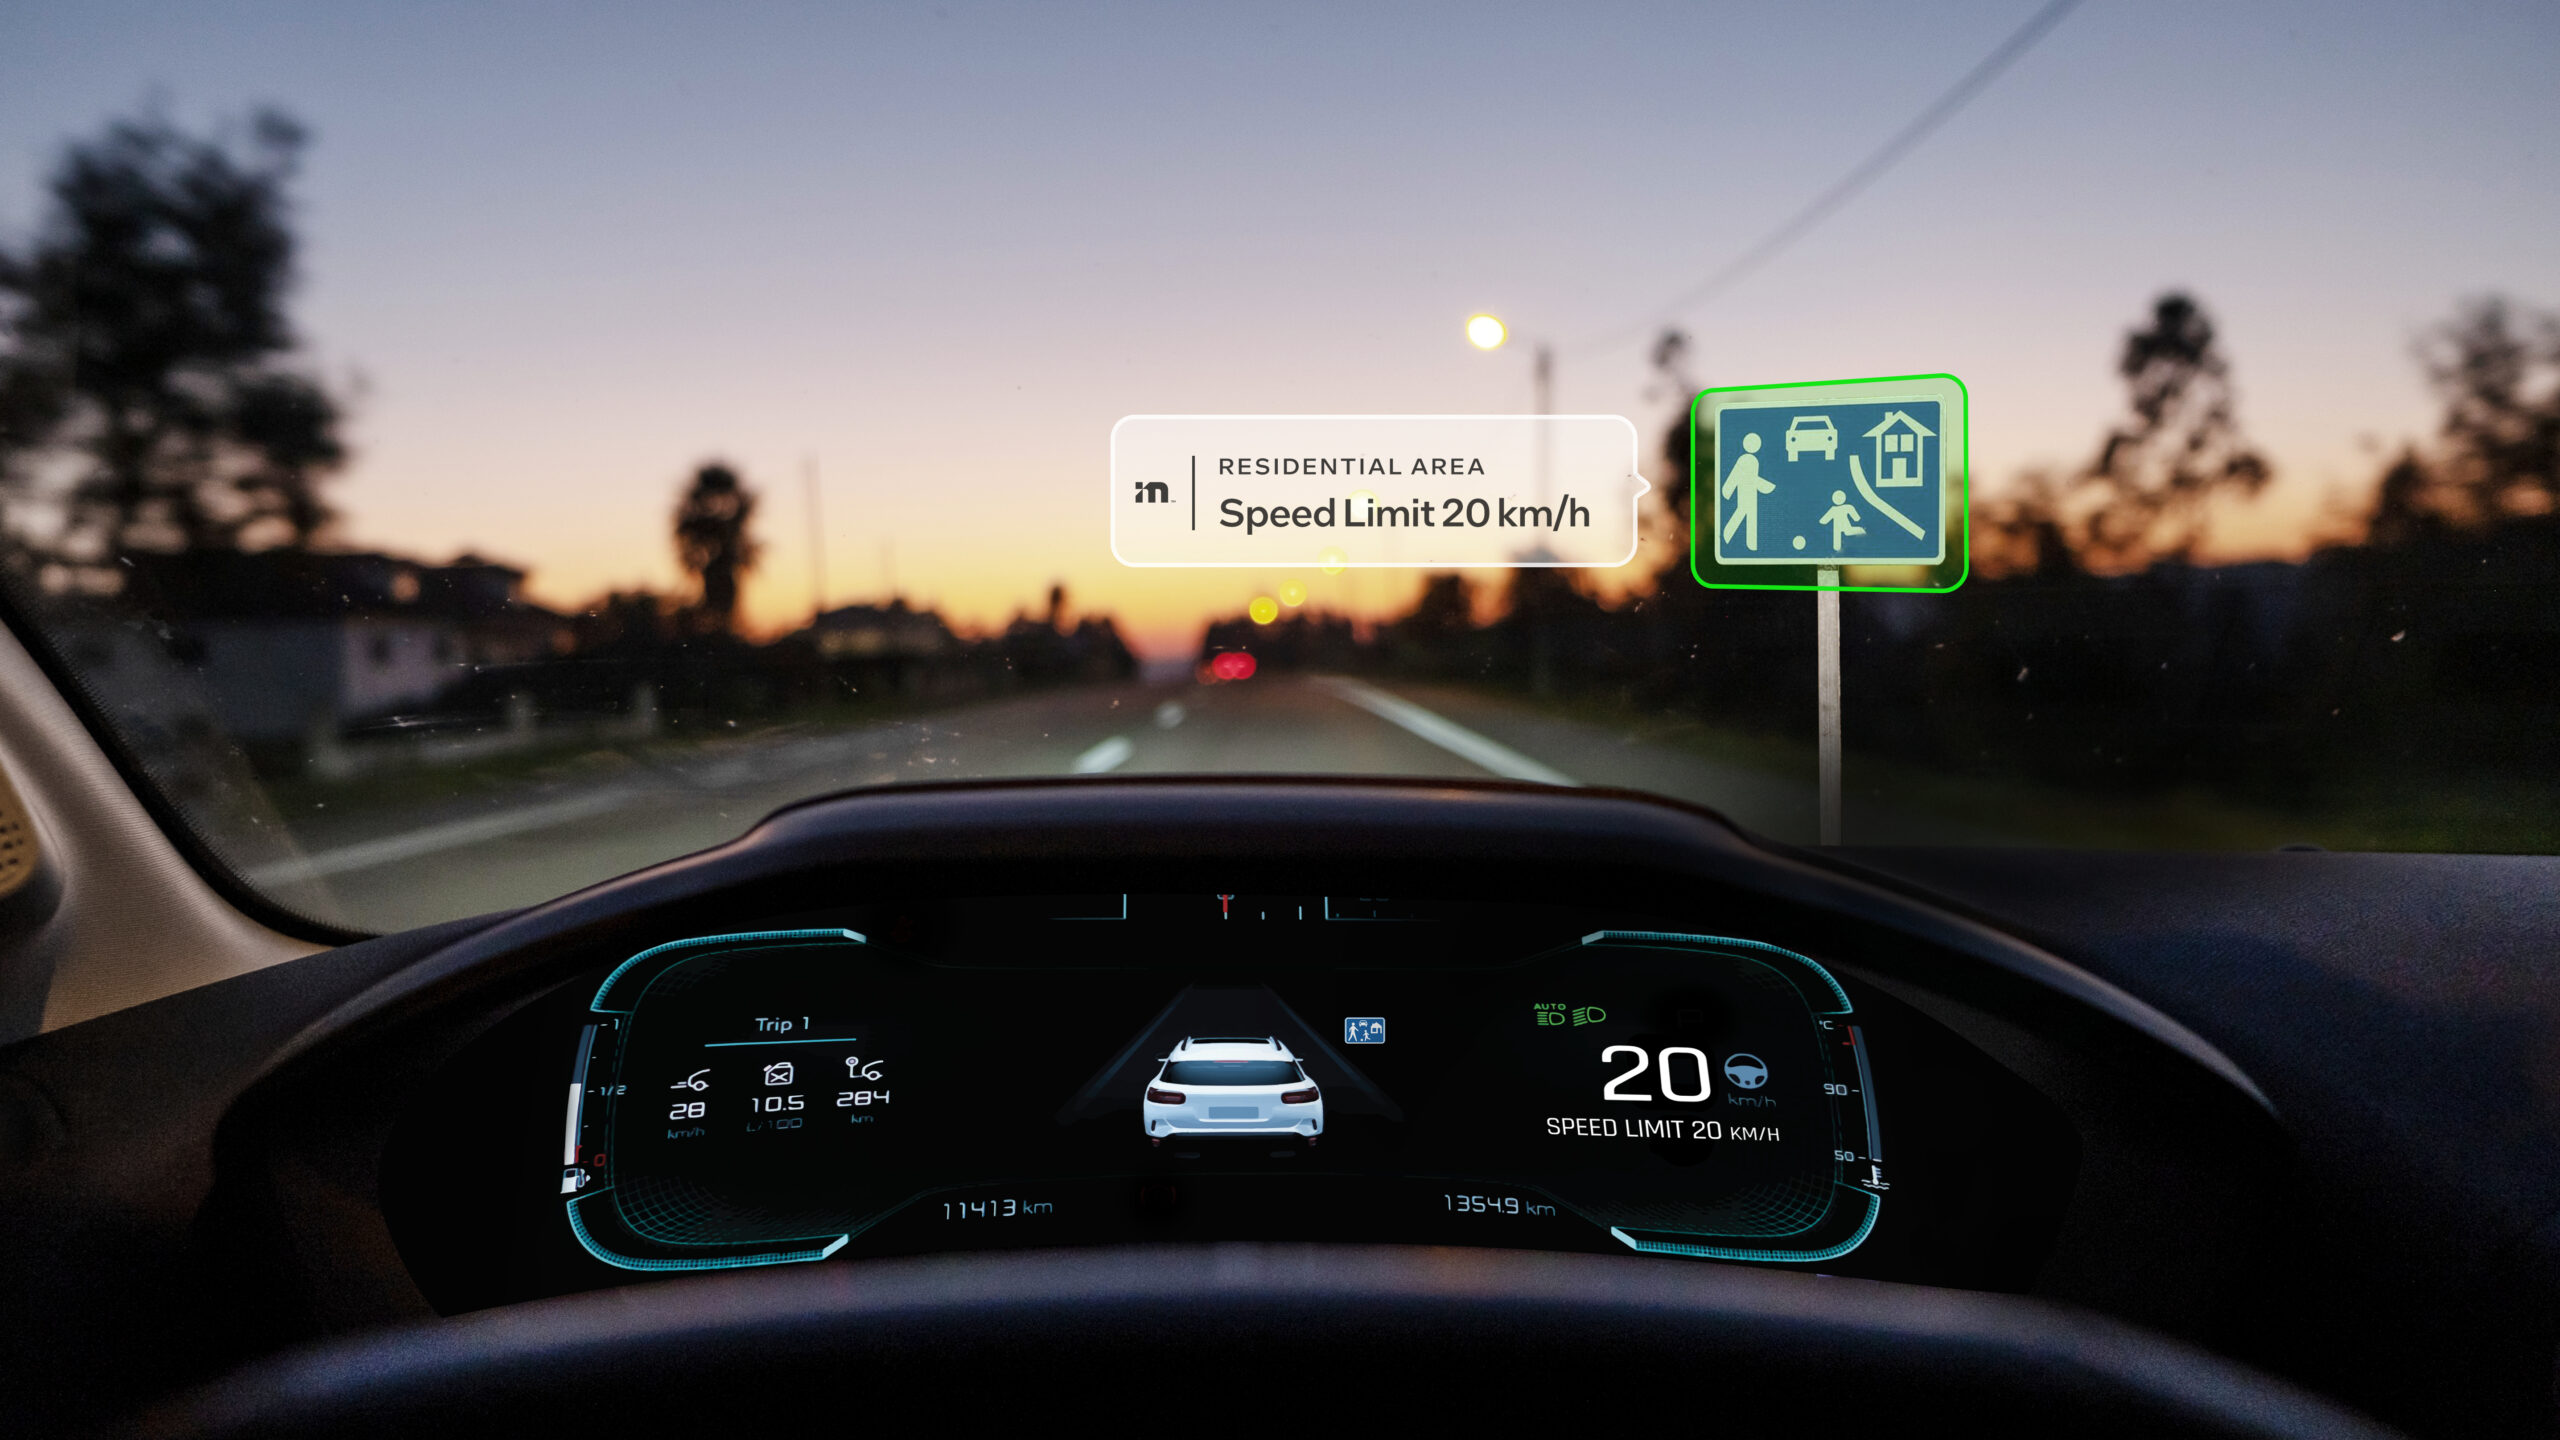 Using only cameras, Mobileye technology can detect a wide array of traffic signs to support Intelligent Speed Assist systems